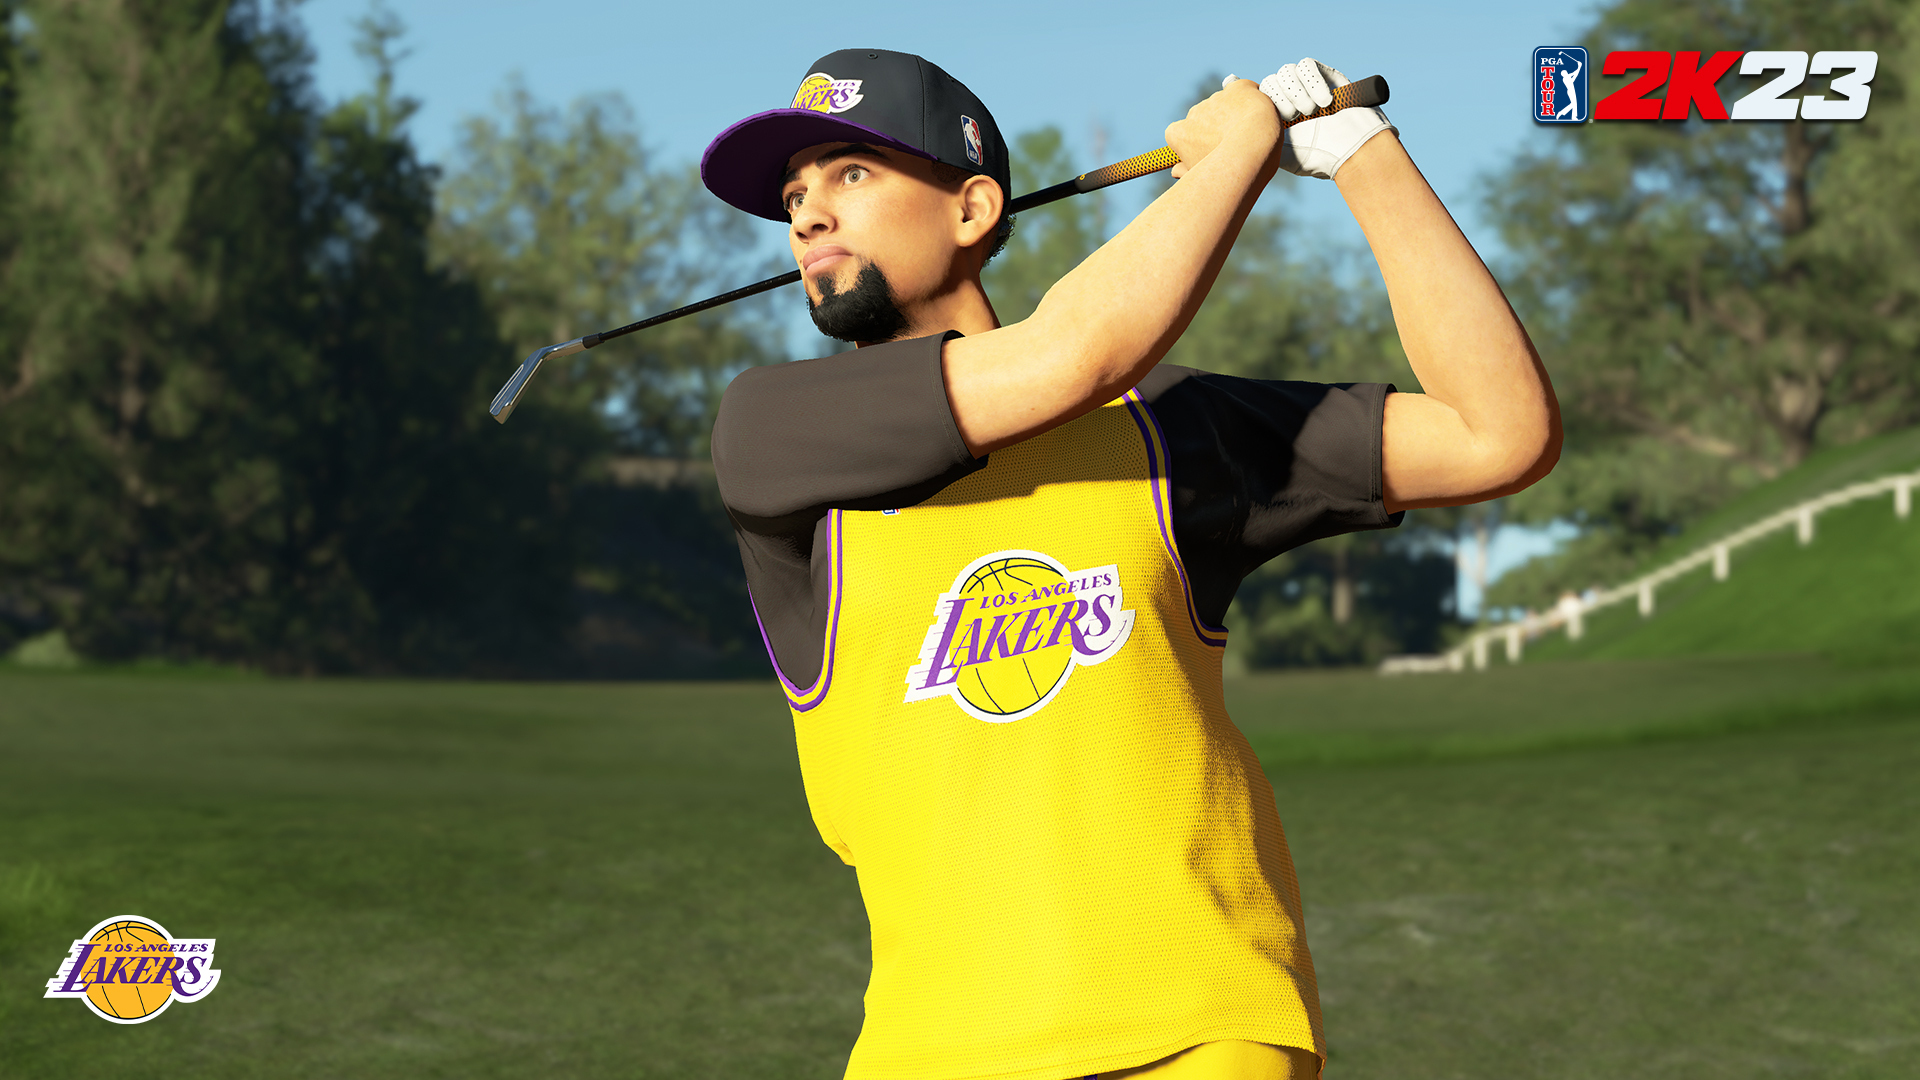 NBA Gear Available Now in PGA Tour 2K23 - Operation Sports